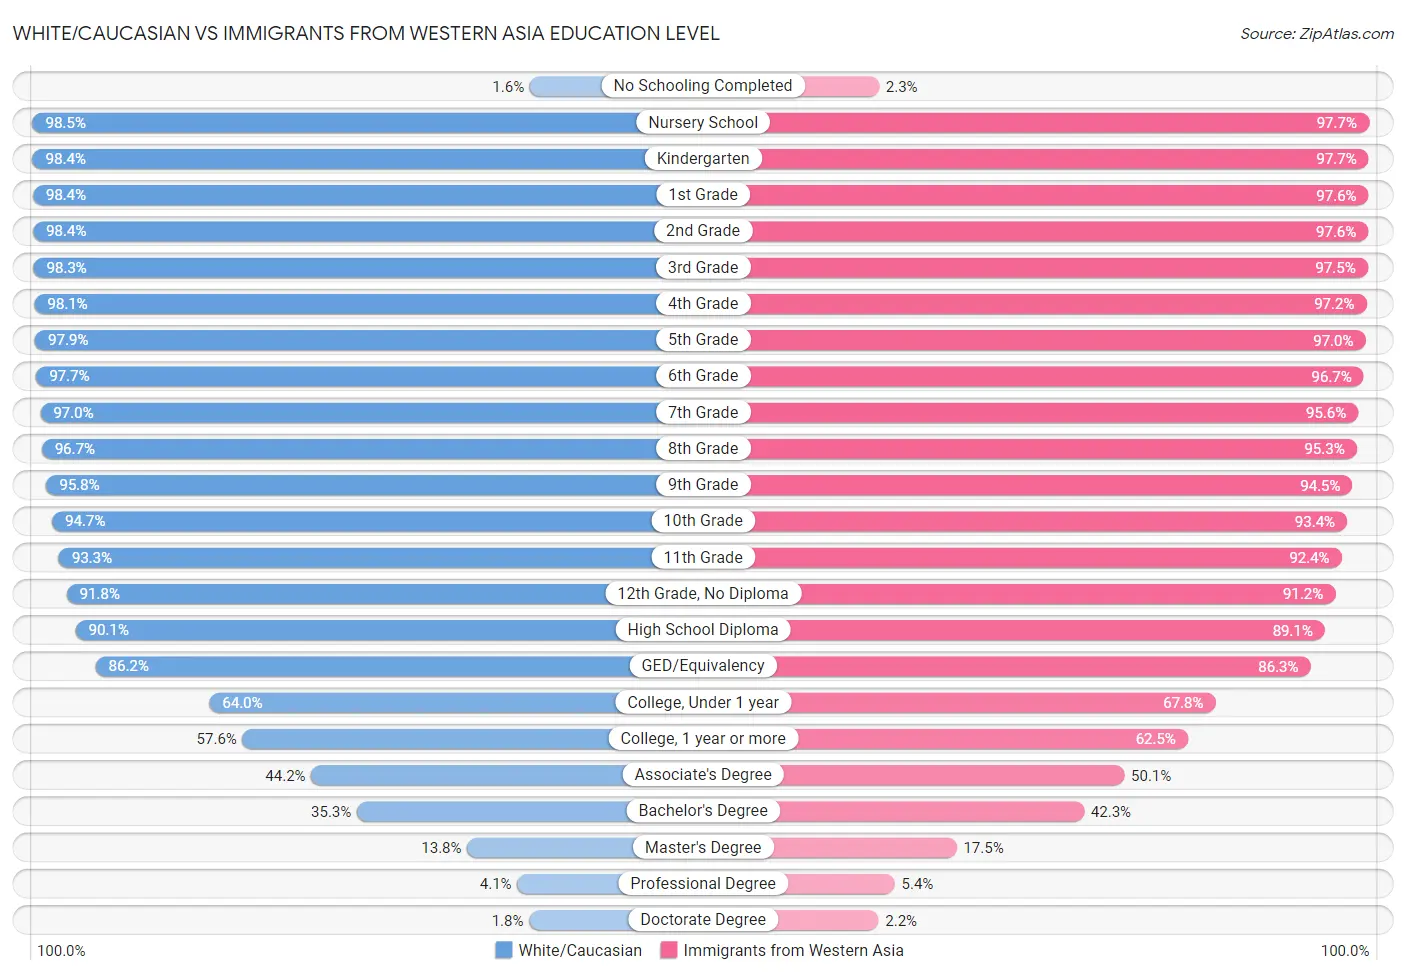 White/Caucasian vs Immigrants from Western Asia Education Level